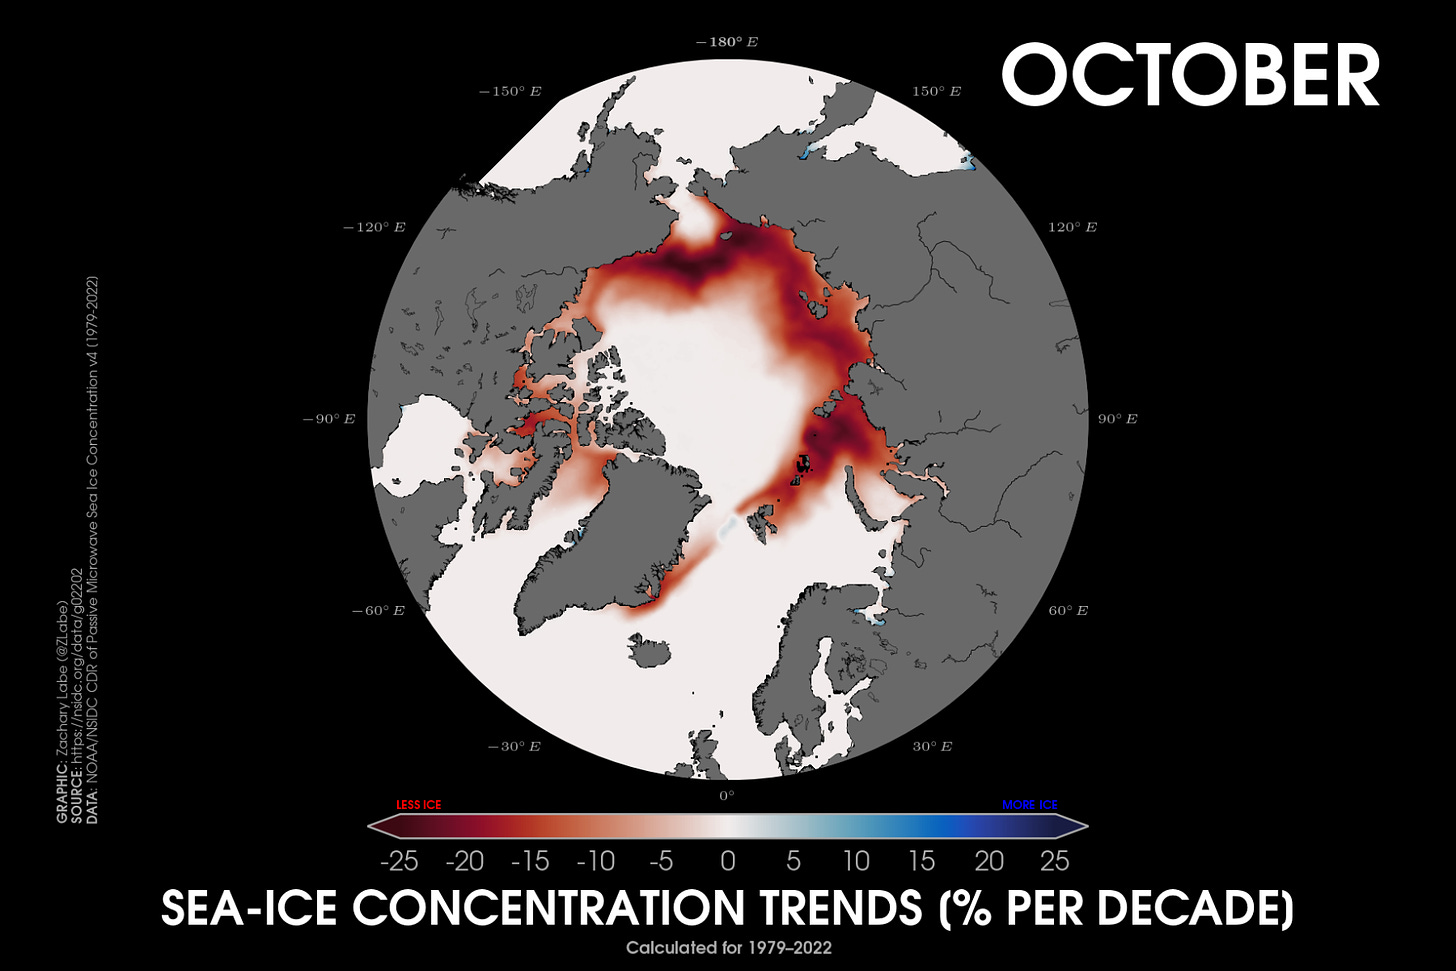 Polar stereographic map showing Arctic sea ice concentration trends for Octobers from 1979 to 2022. Red shading is shown for deceasing sea ice, and blue shading is shown for increasing sea ice. Trends are calculated in % per decade. All areas are observing decreasing sea ice in the outer edges of the Arctic Ocean.